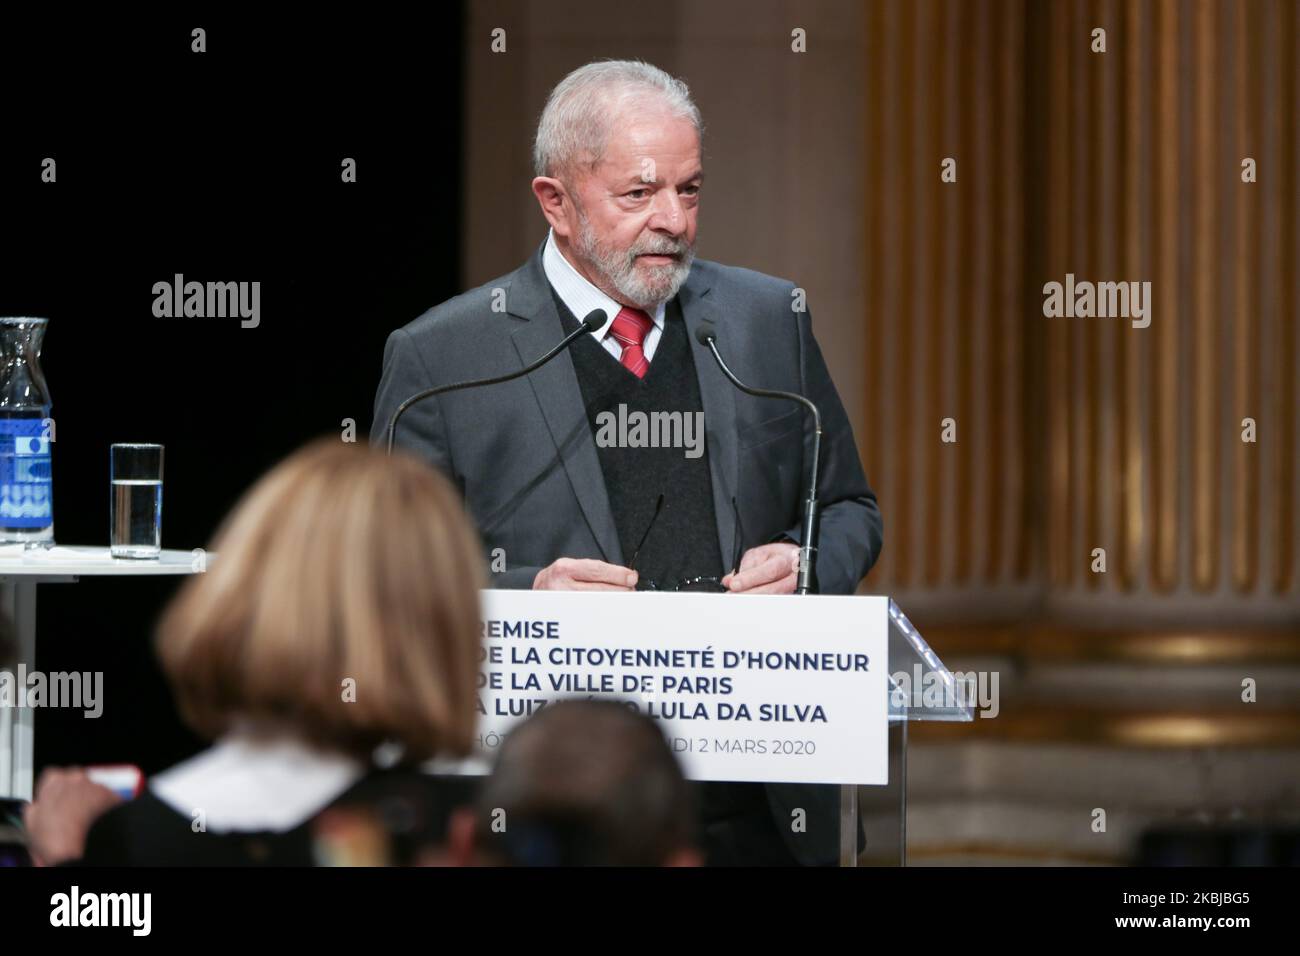 Former Brazilian president Luiz Inacio Lula da Silva speaks during a ceremony at the City Hall of Paris, on March 2, 2020, during wich he was named honorary citizen of the city of Paris. (Photo by Michel Stoupak/NurPhoto) Stock Photo